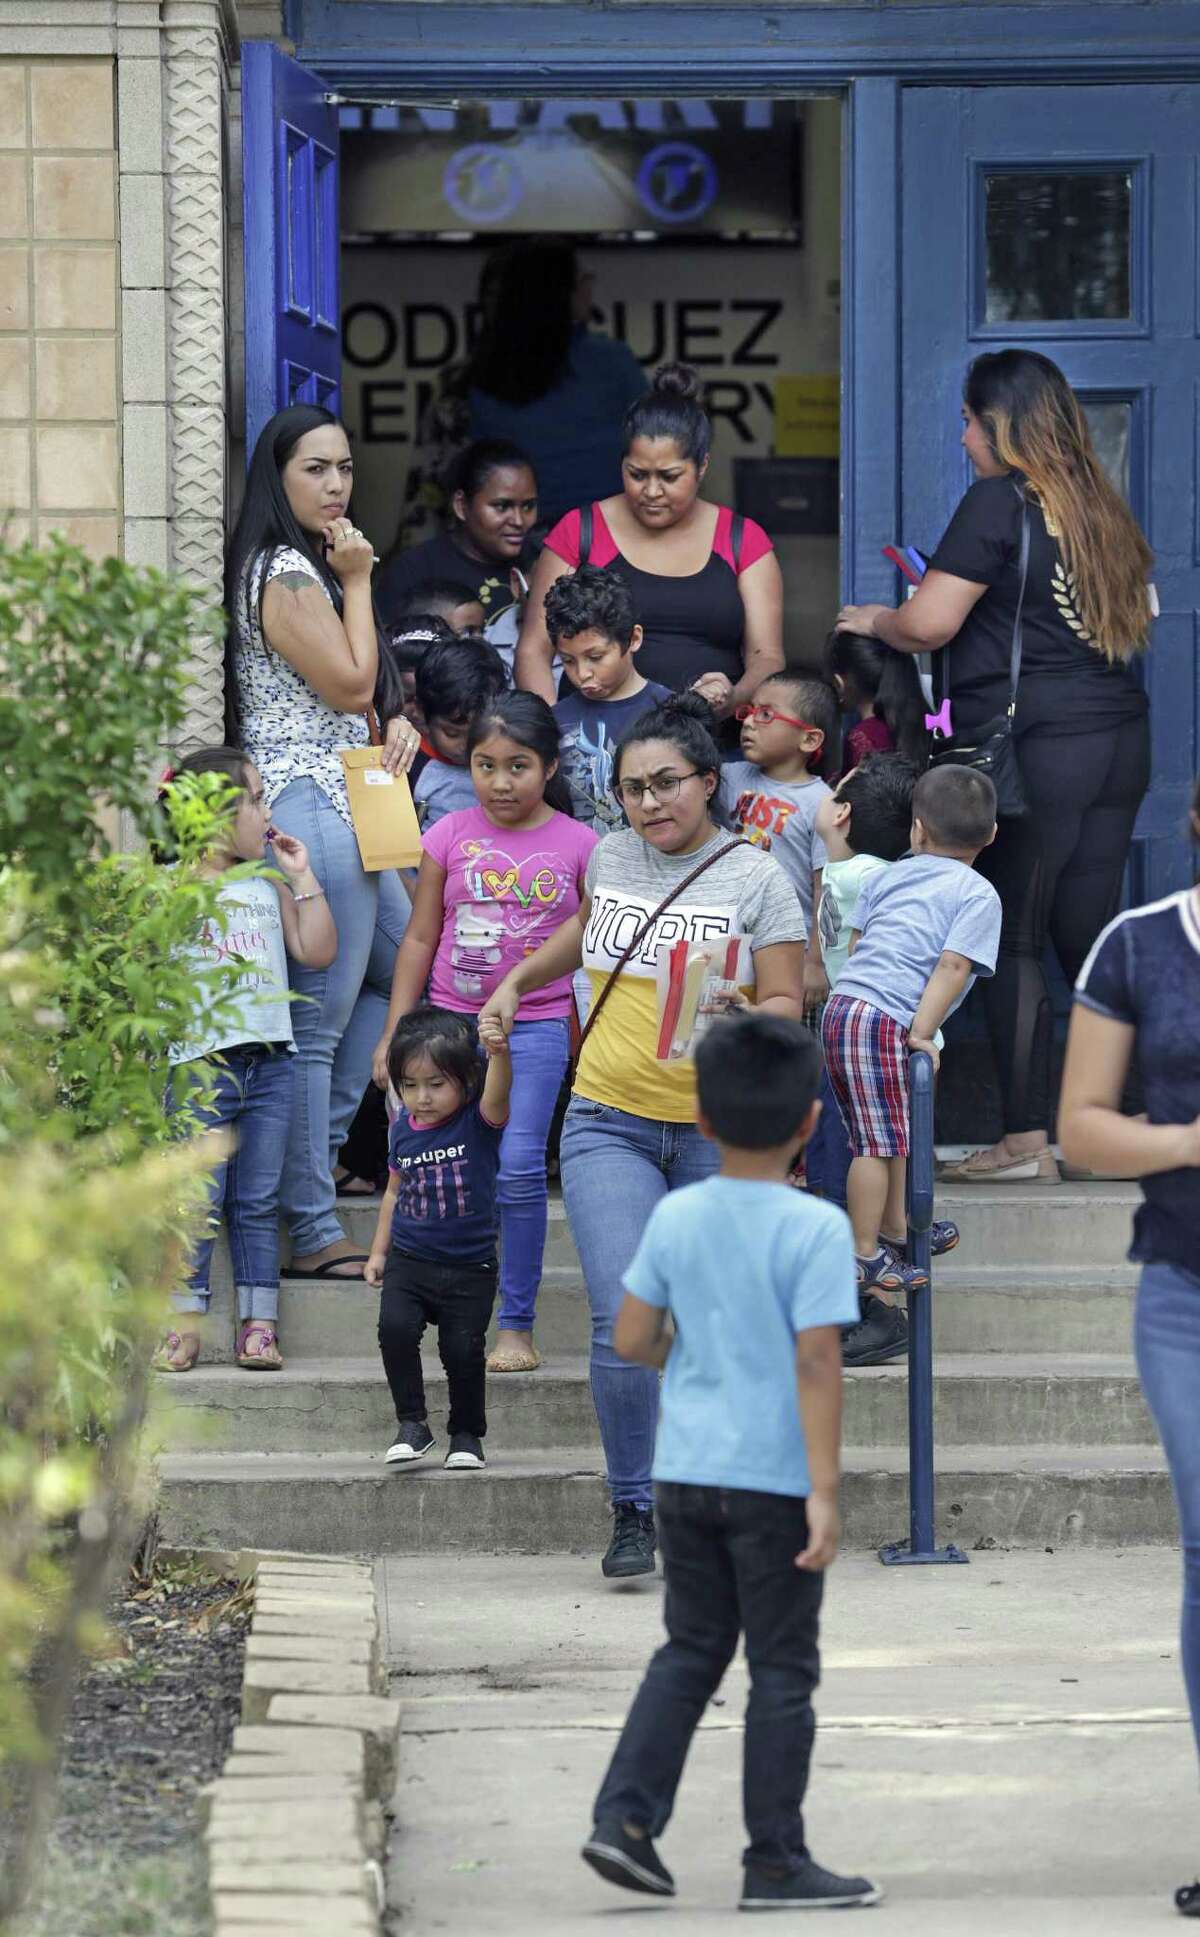 Kids leave Cleto Rodriguez Elementary School last week after visiting with parents to meet their teachers. SAISD officials will close the school next year, however, because it failed state accountability ratings five years in a row.